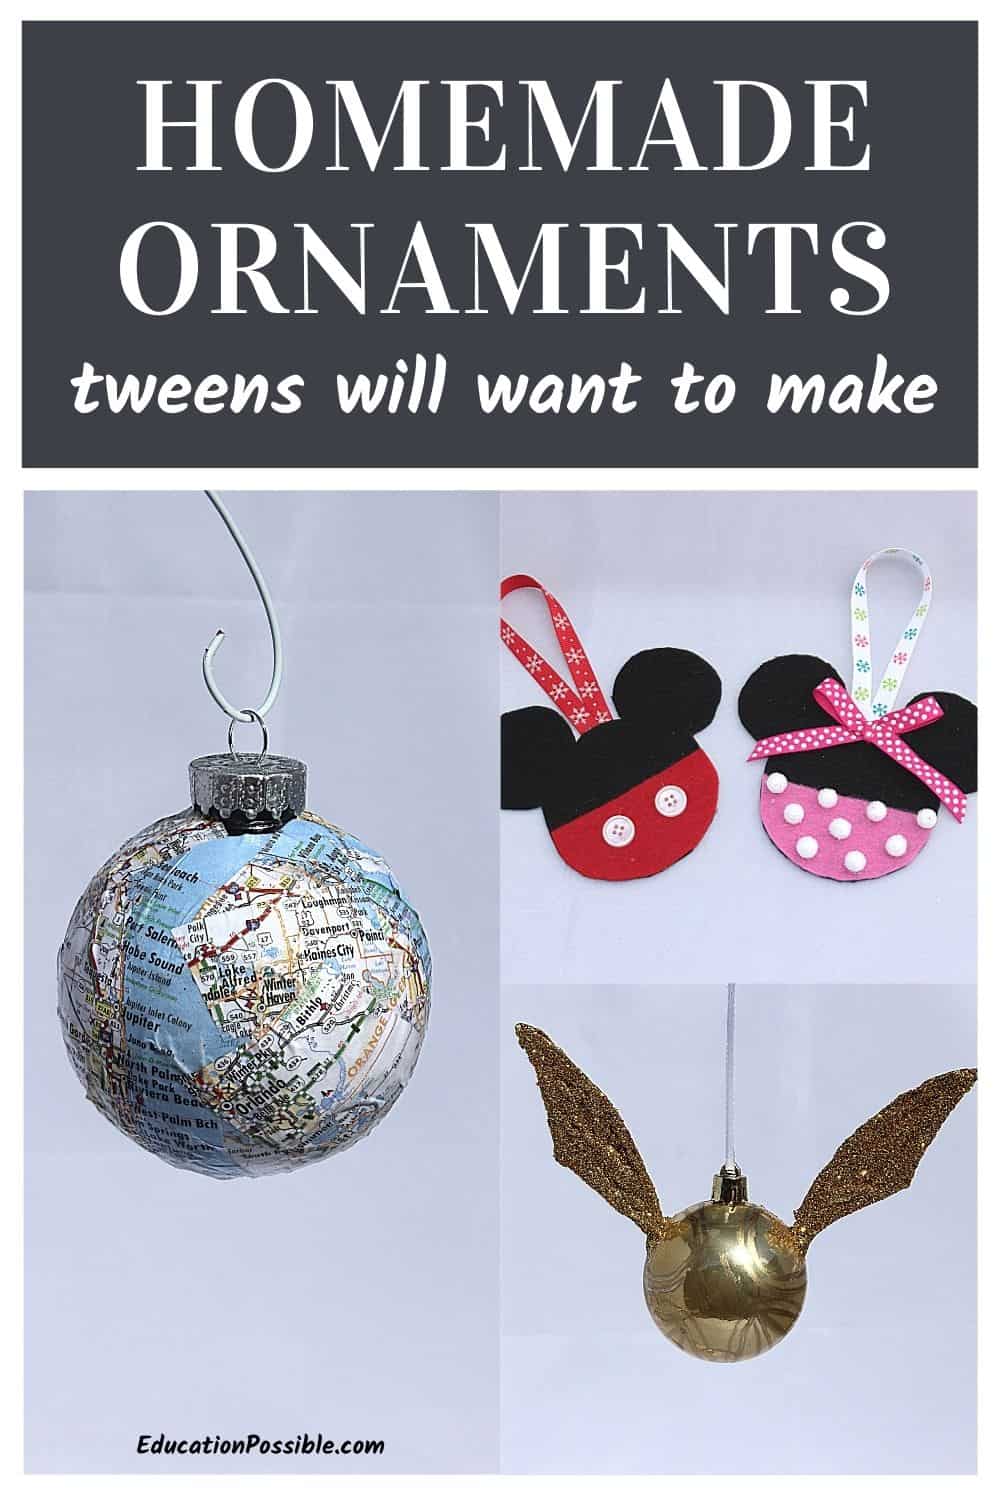 Collage of three homemade ornaments - ball covered with a map, Mickey and Minnie felt silhouette, Harry Potter Golden Snitch